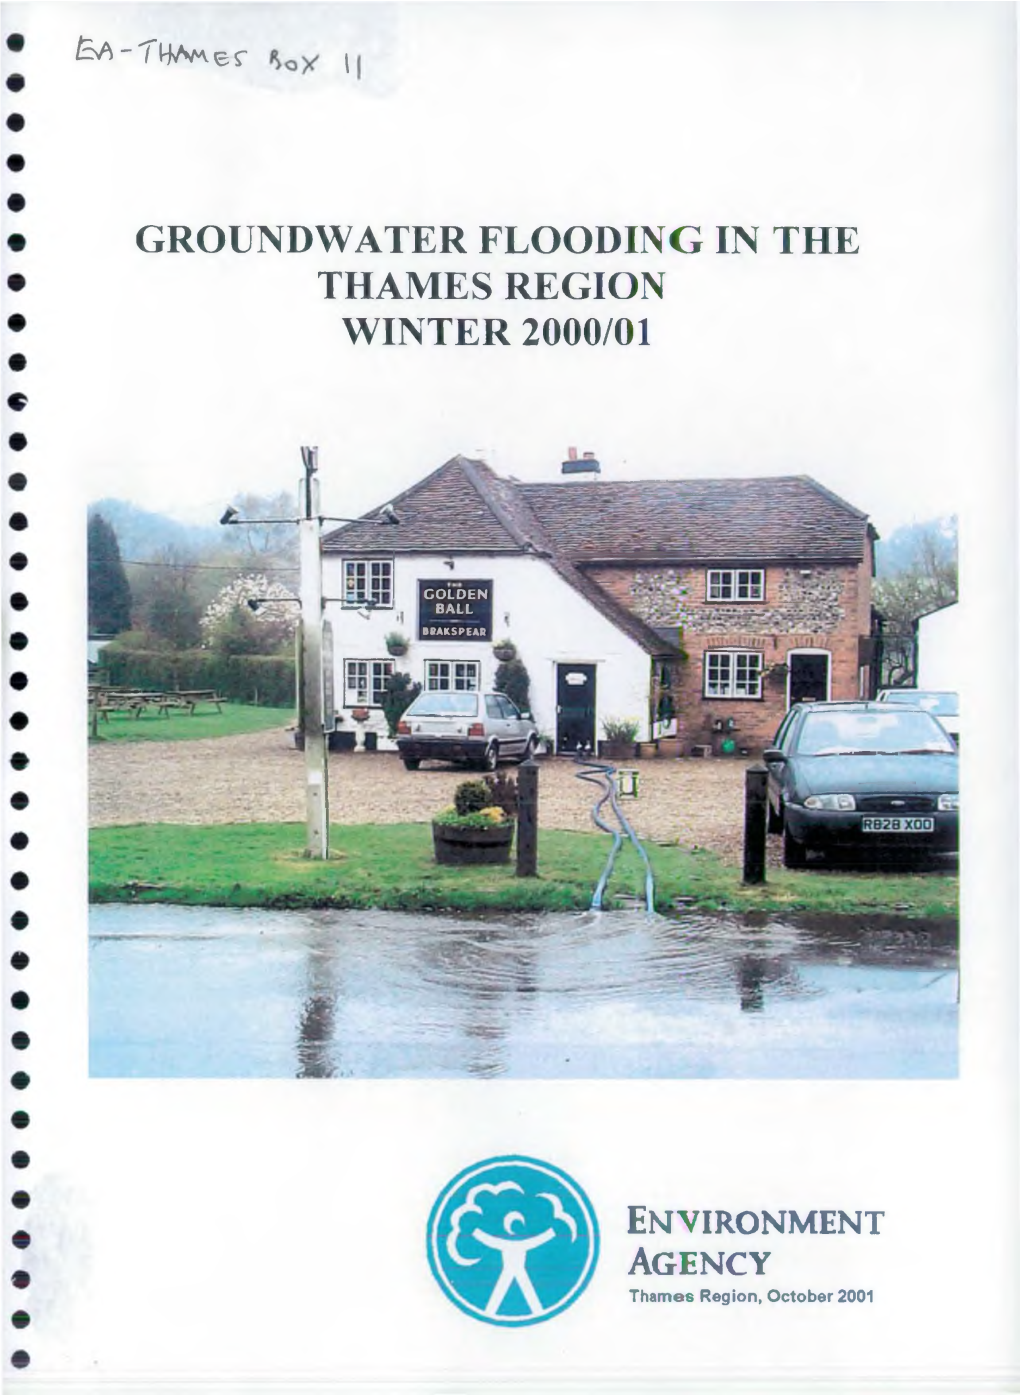 Groundwater Flooding in the Thames Region Winter 2000/01